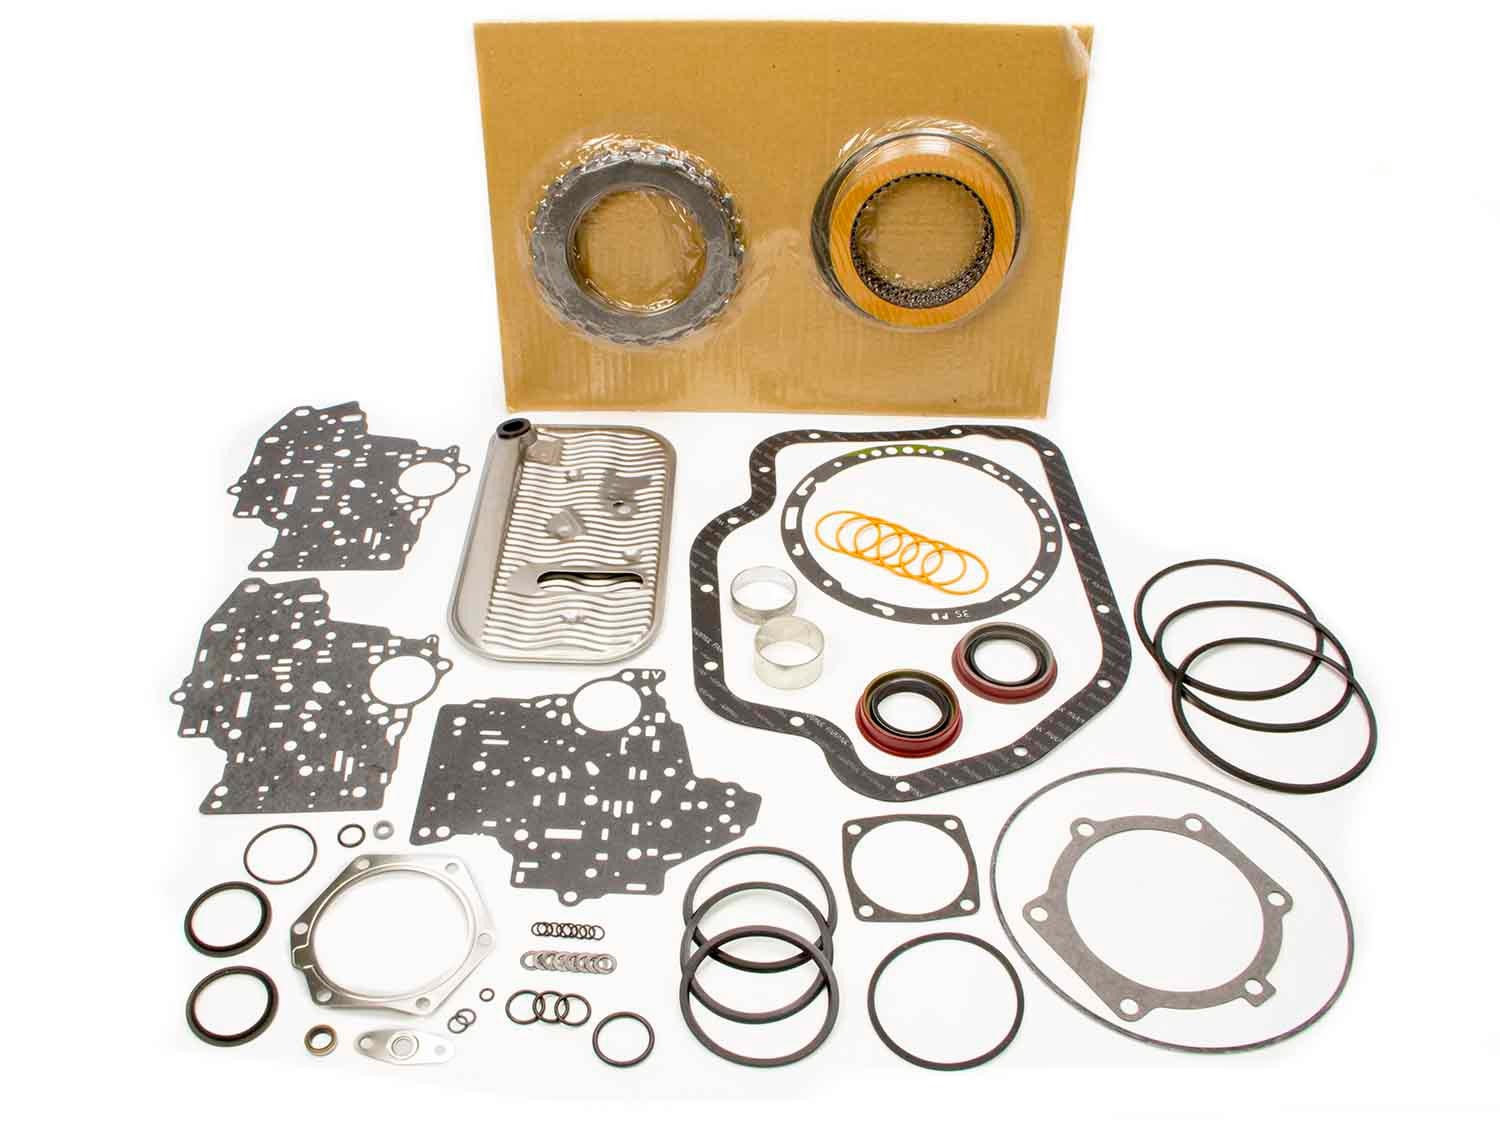 TCI 259000 Transmission Rebuild Kit, Automatic, Master Racing Overhaul, Clutches / Steels / Bands / Filter / Gaskets / Seals, TH400, Kit